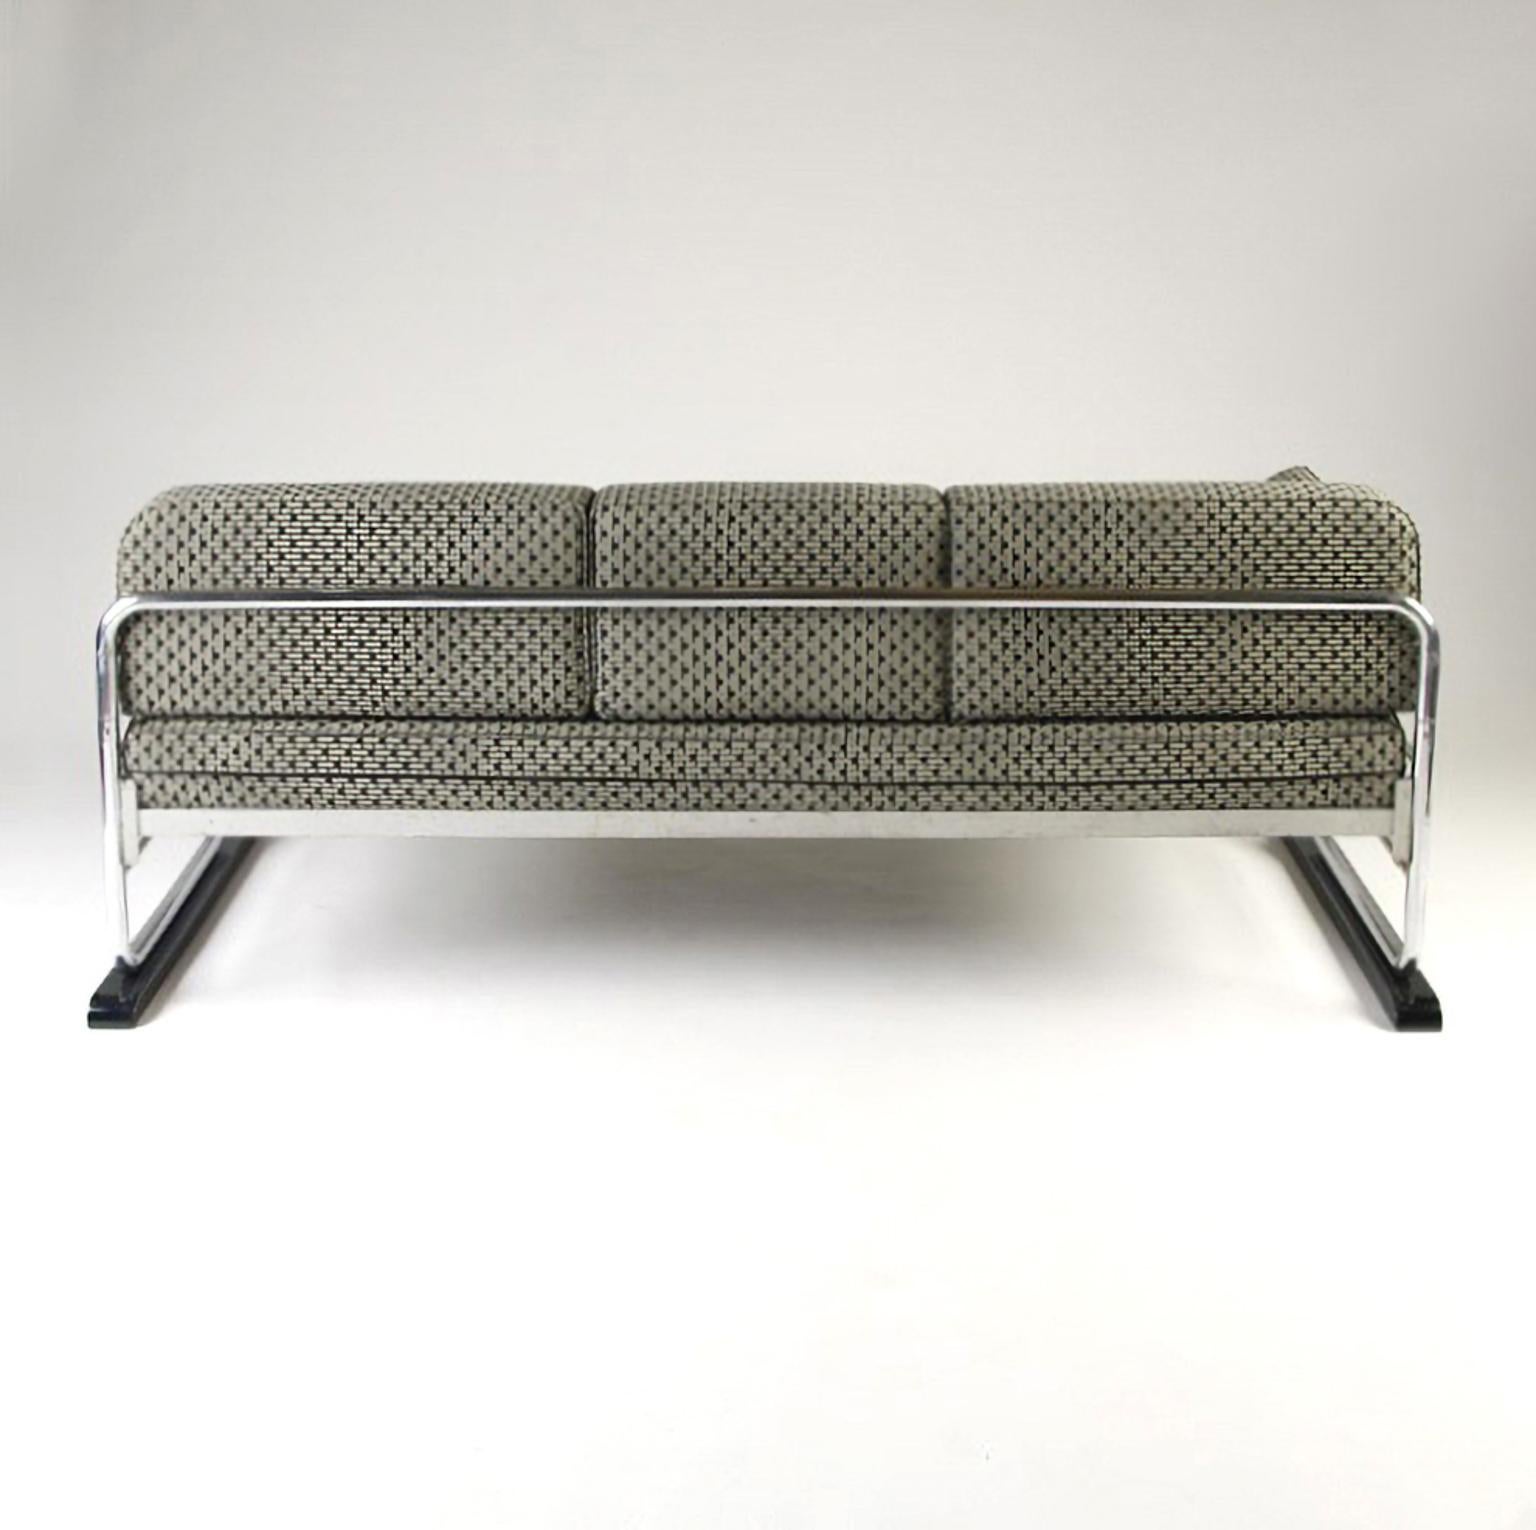 German Modernist Tubular Steel Couch/ Daybed, Chromed Metal, Fabric Upholstery, c. 1930 For Sale